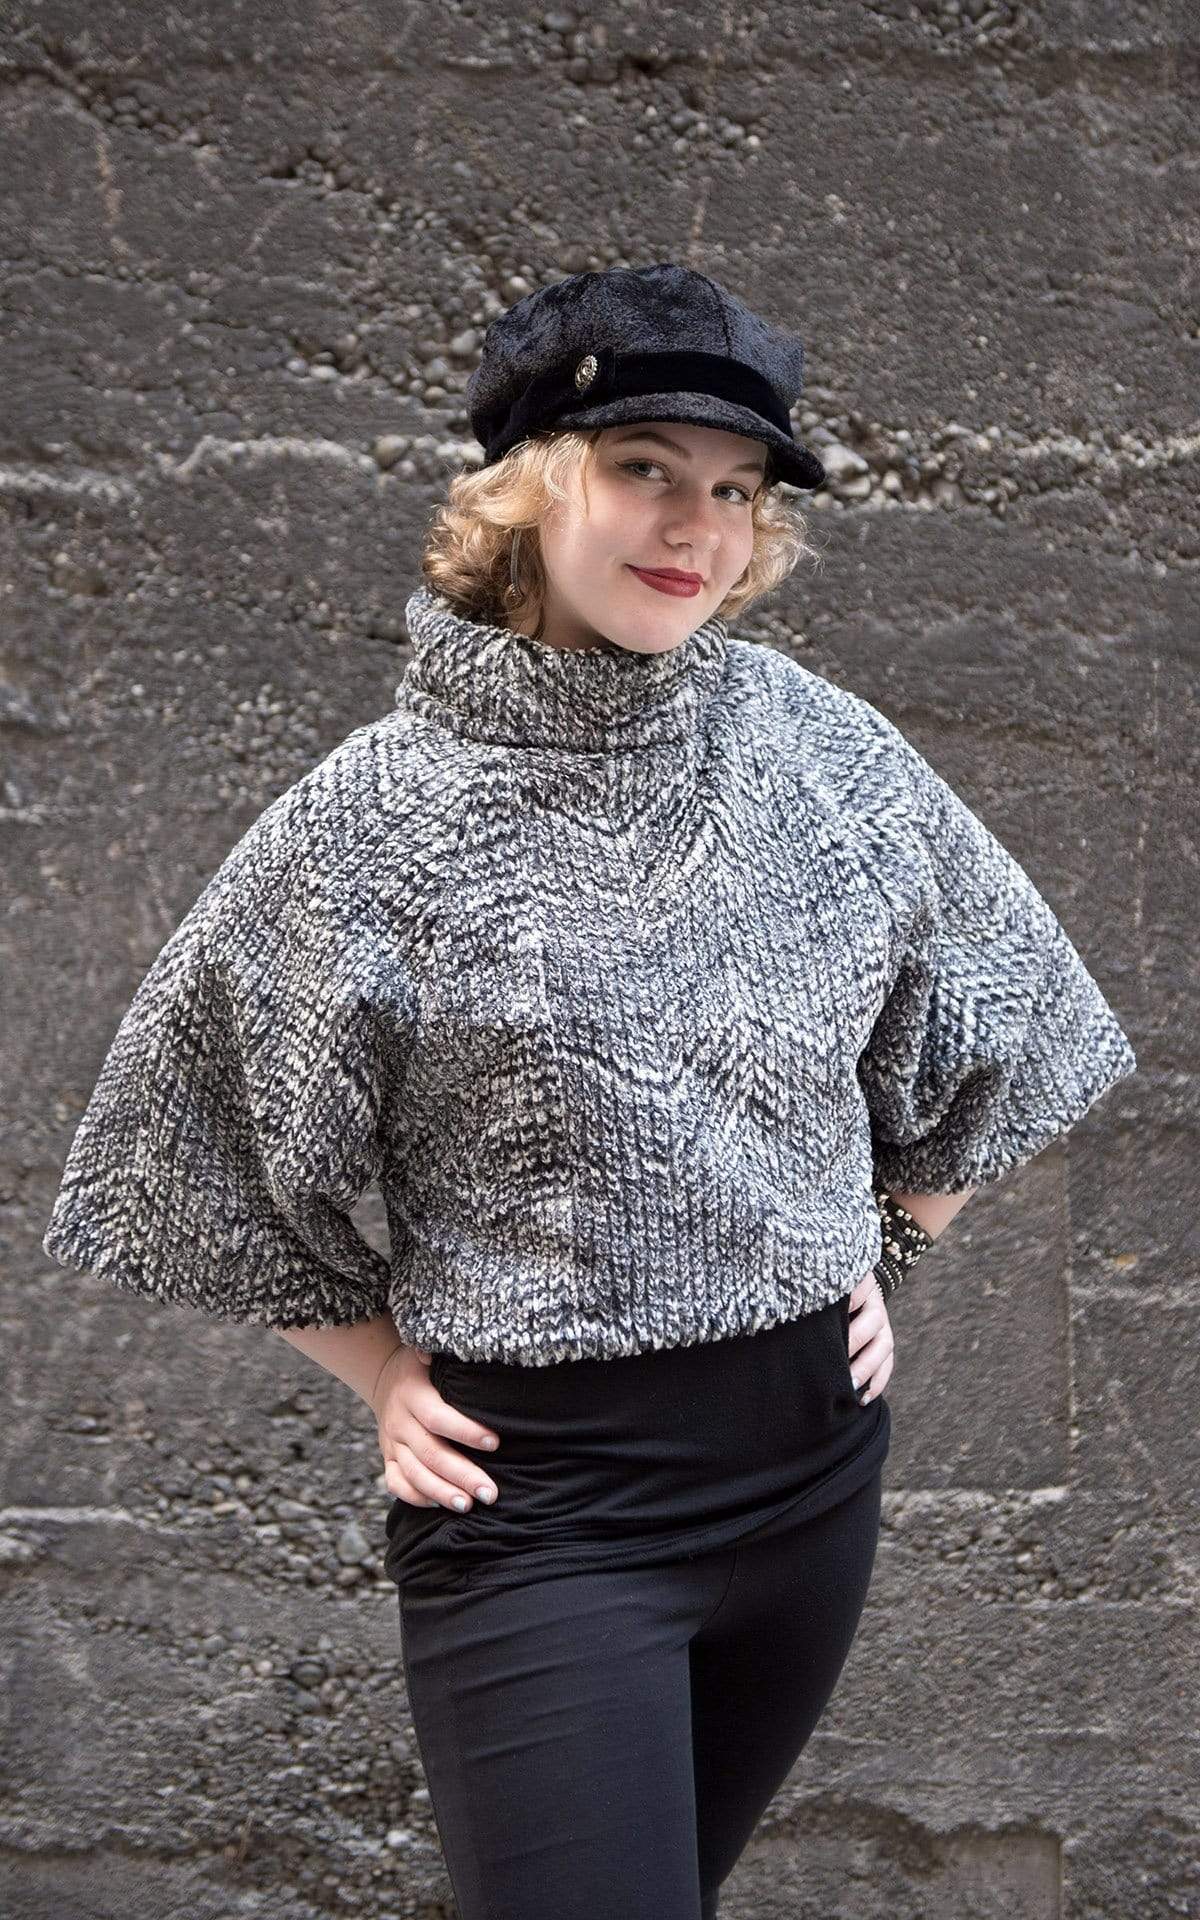 Pandemonium Millinery Sweater Top - Cuddly Faux Fur in Black Outerwear